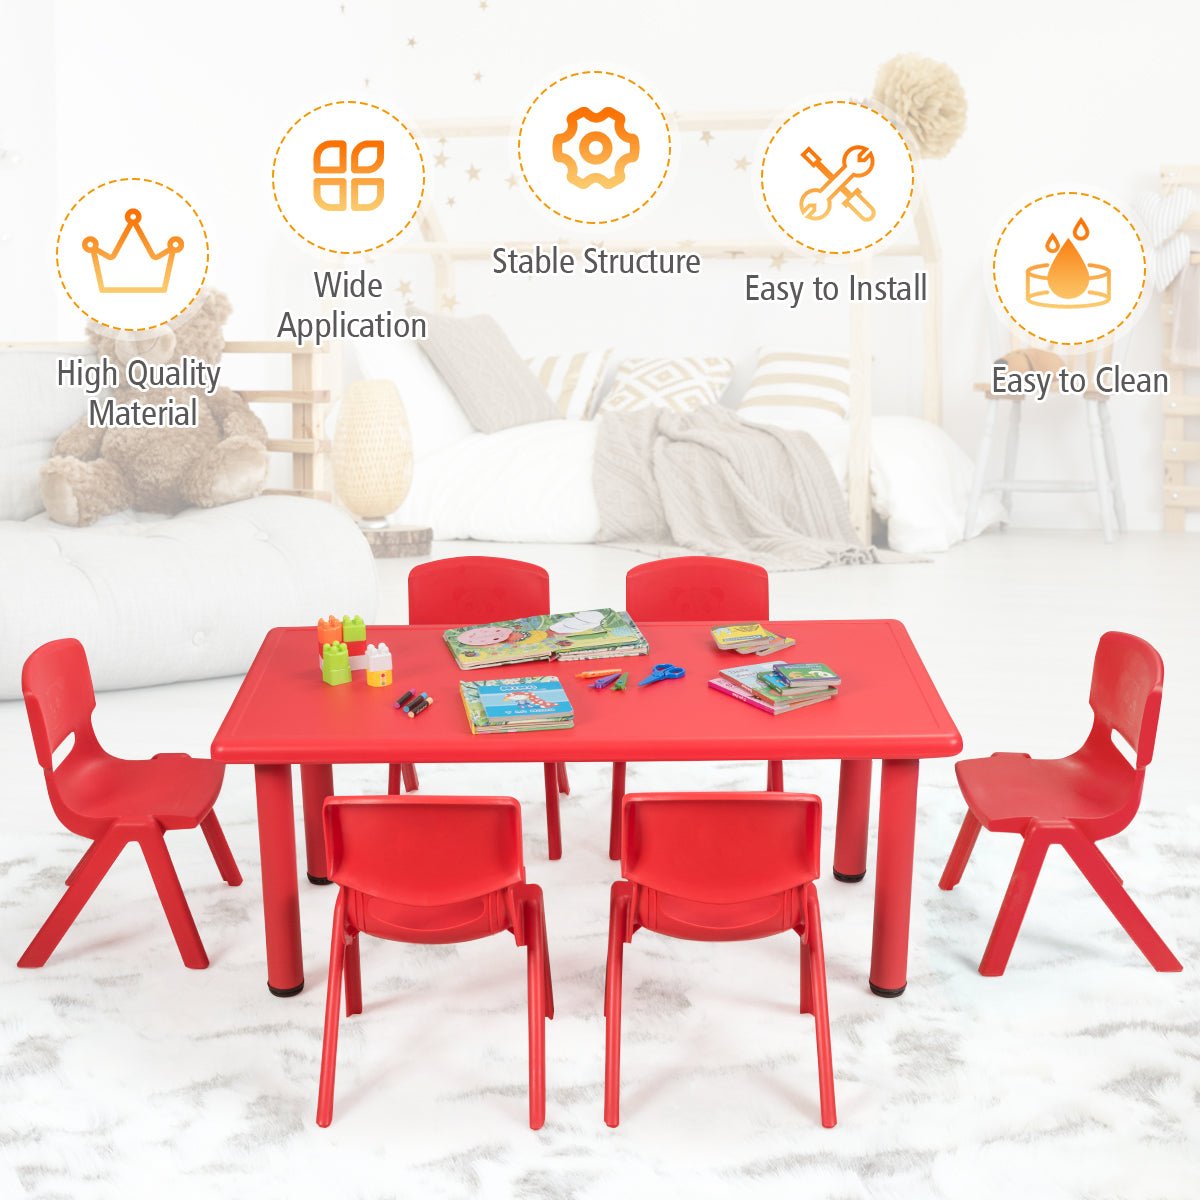 Children's Table and 6 Chairs Set - Comfortable Seating for Kids